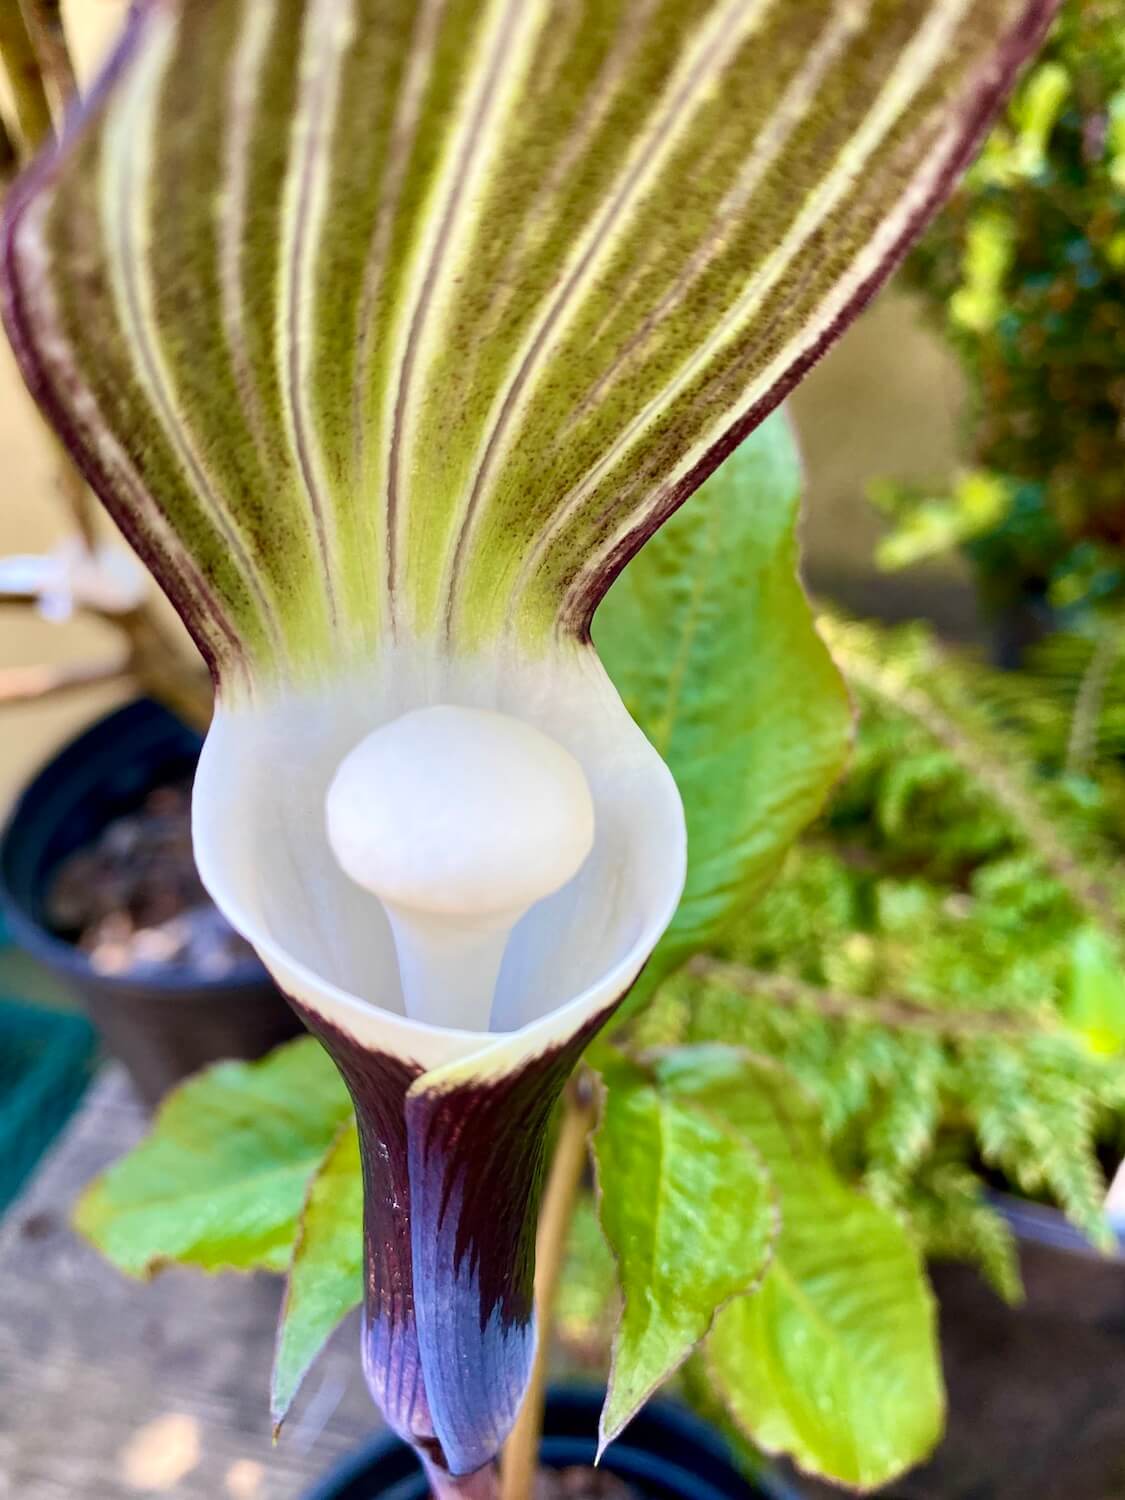 An unusual flower opens up with a creamy white stamin while the variagated leaf dabbles between olive greens and rich deep purple.  The green leaves below are blurred out. 